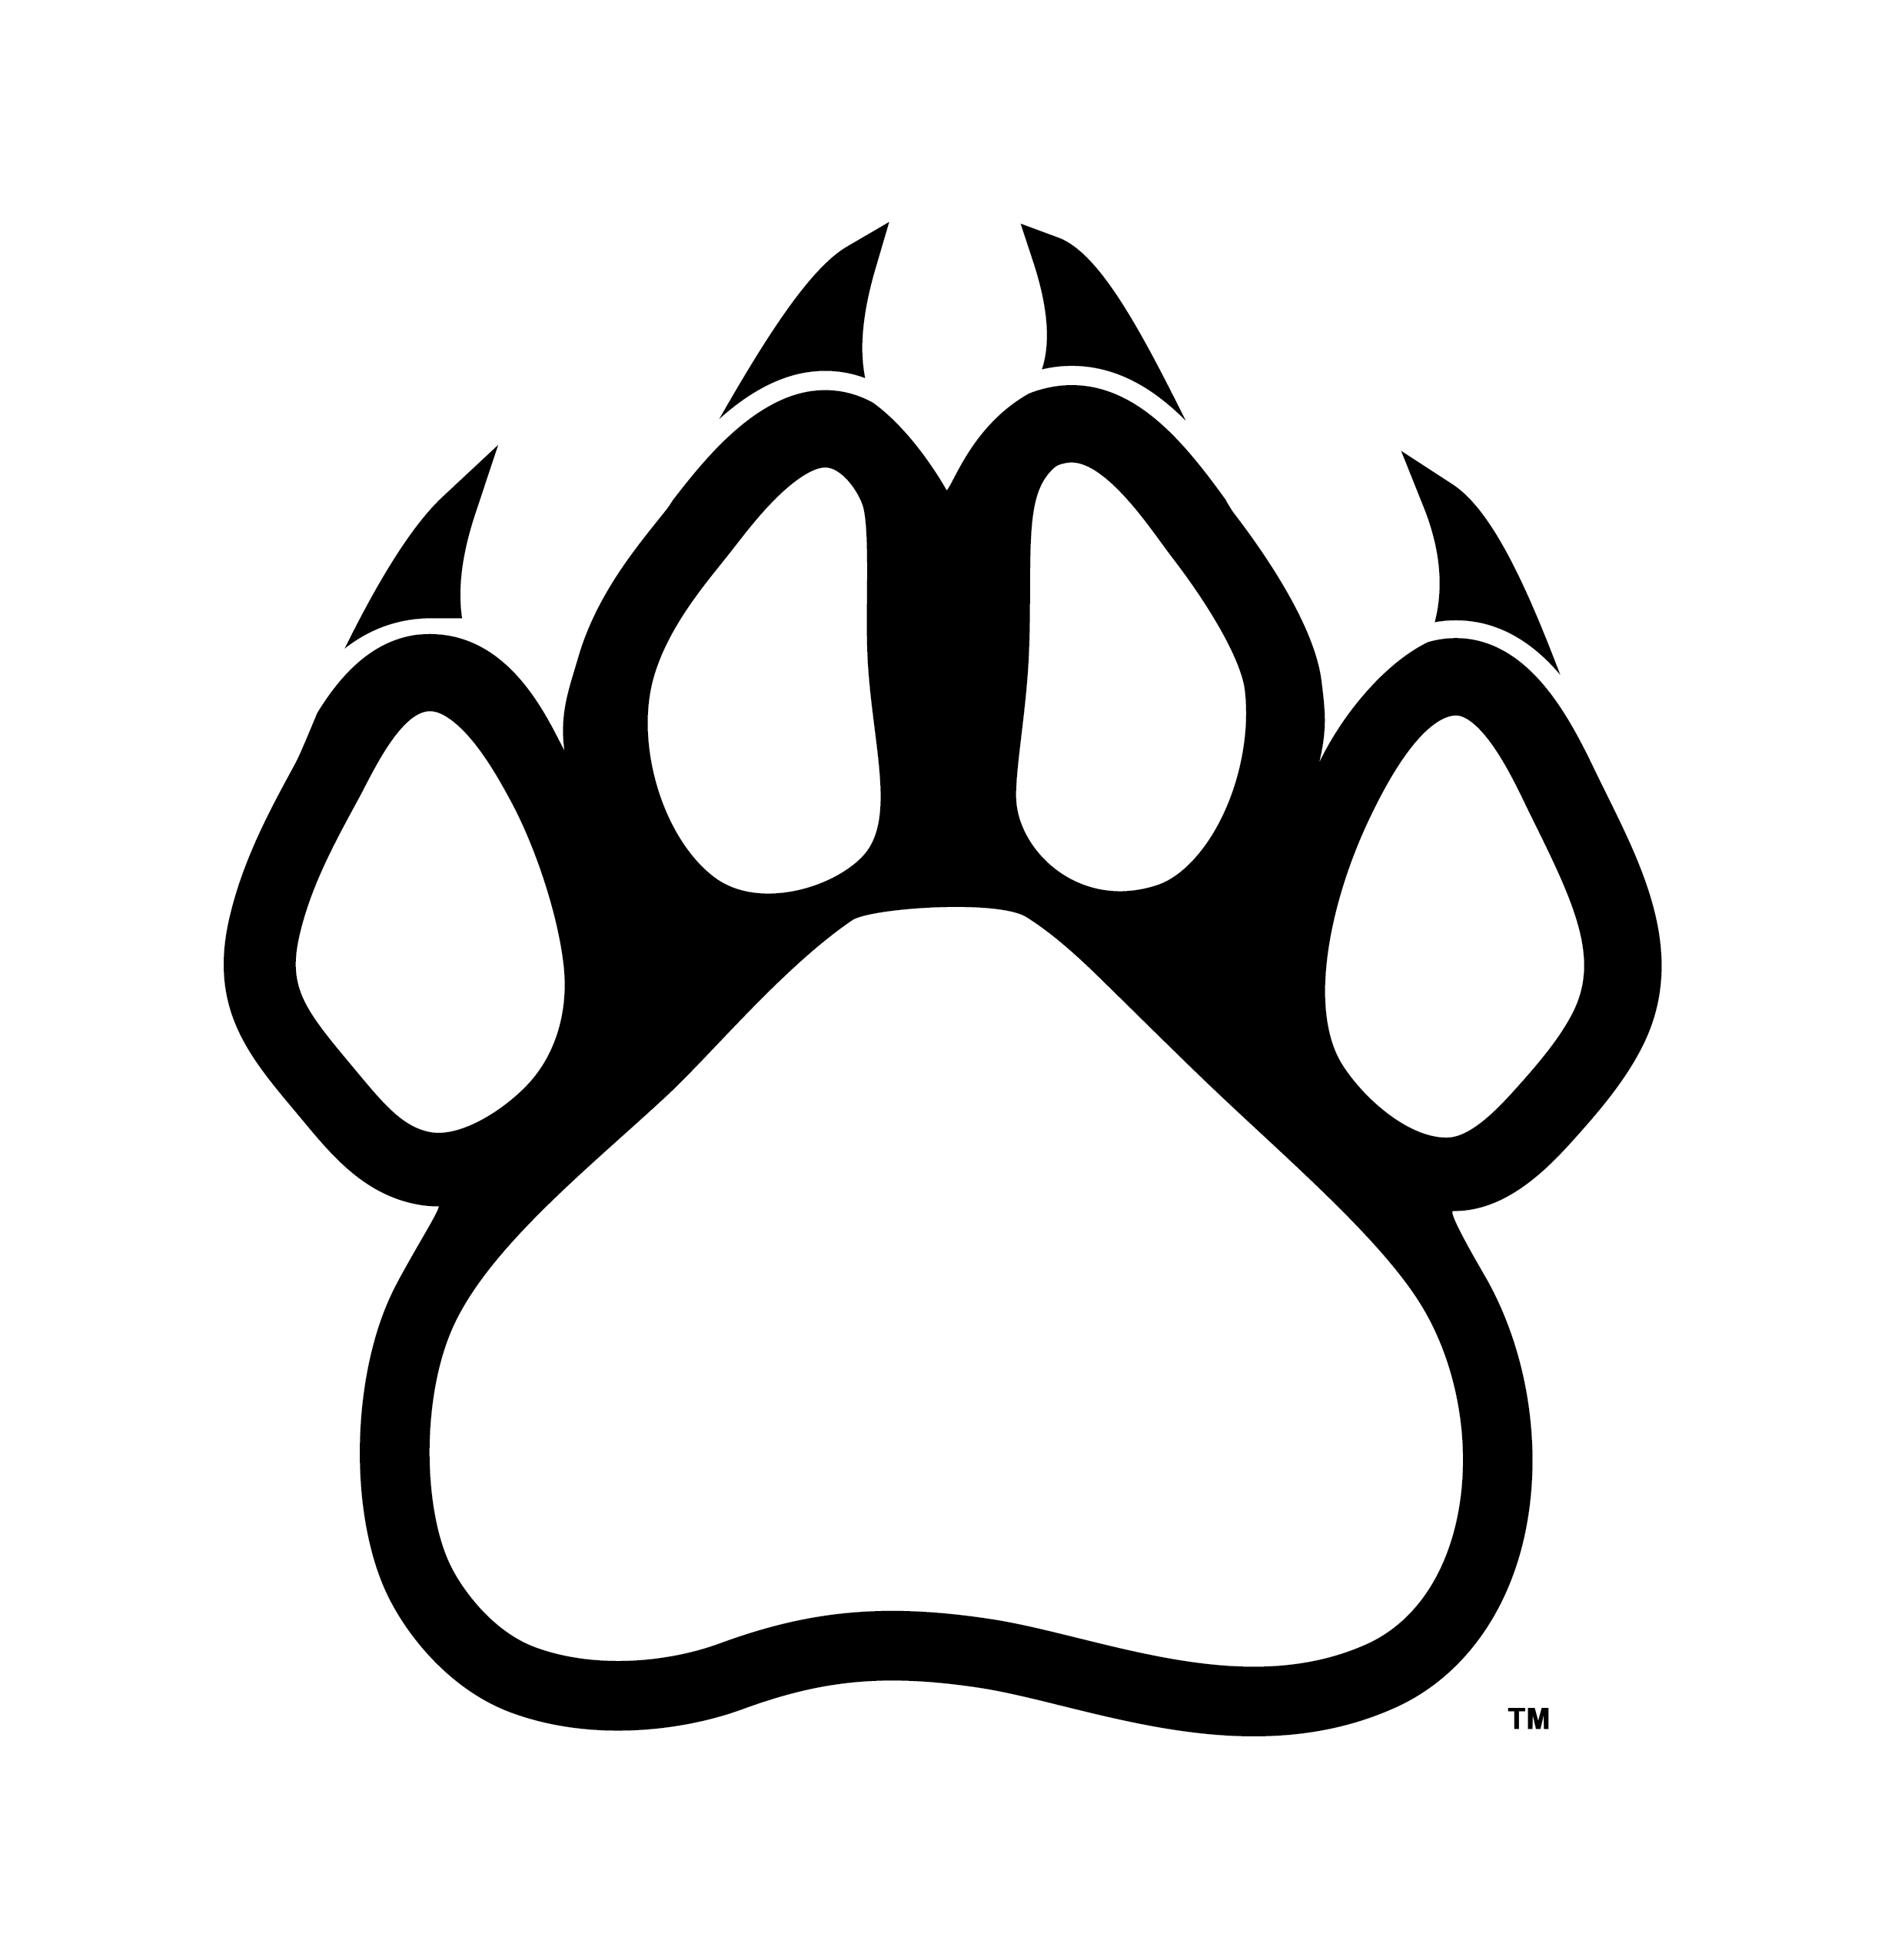 37 Panther Paw Prints Free Cliparts That You Can Download To You